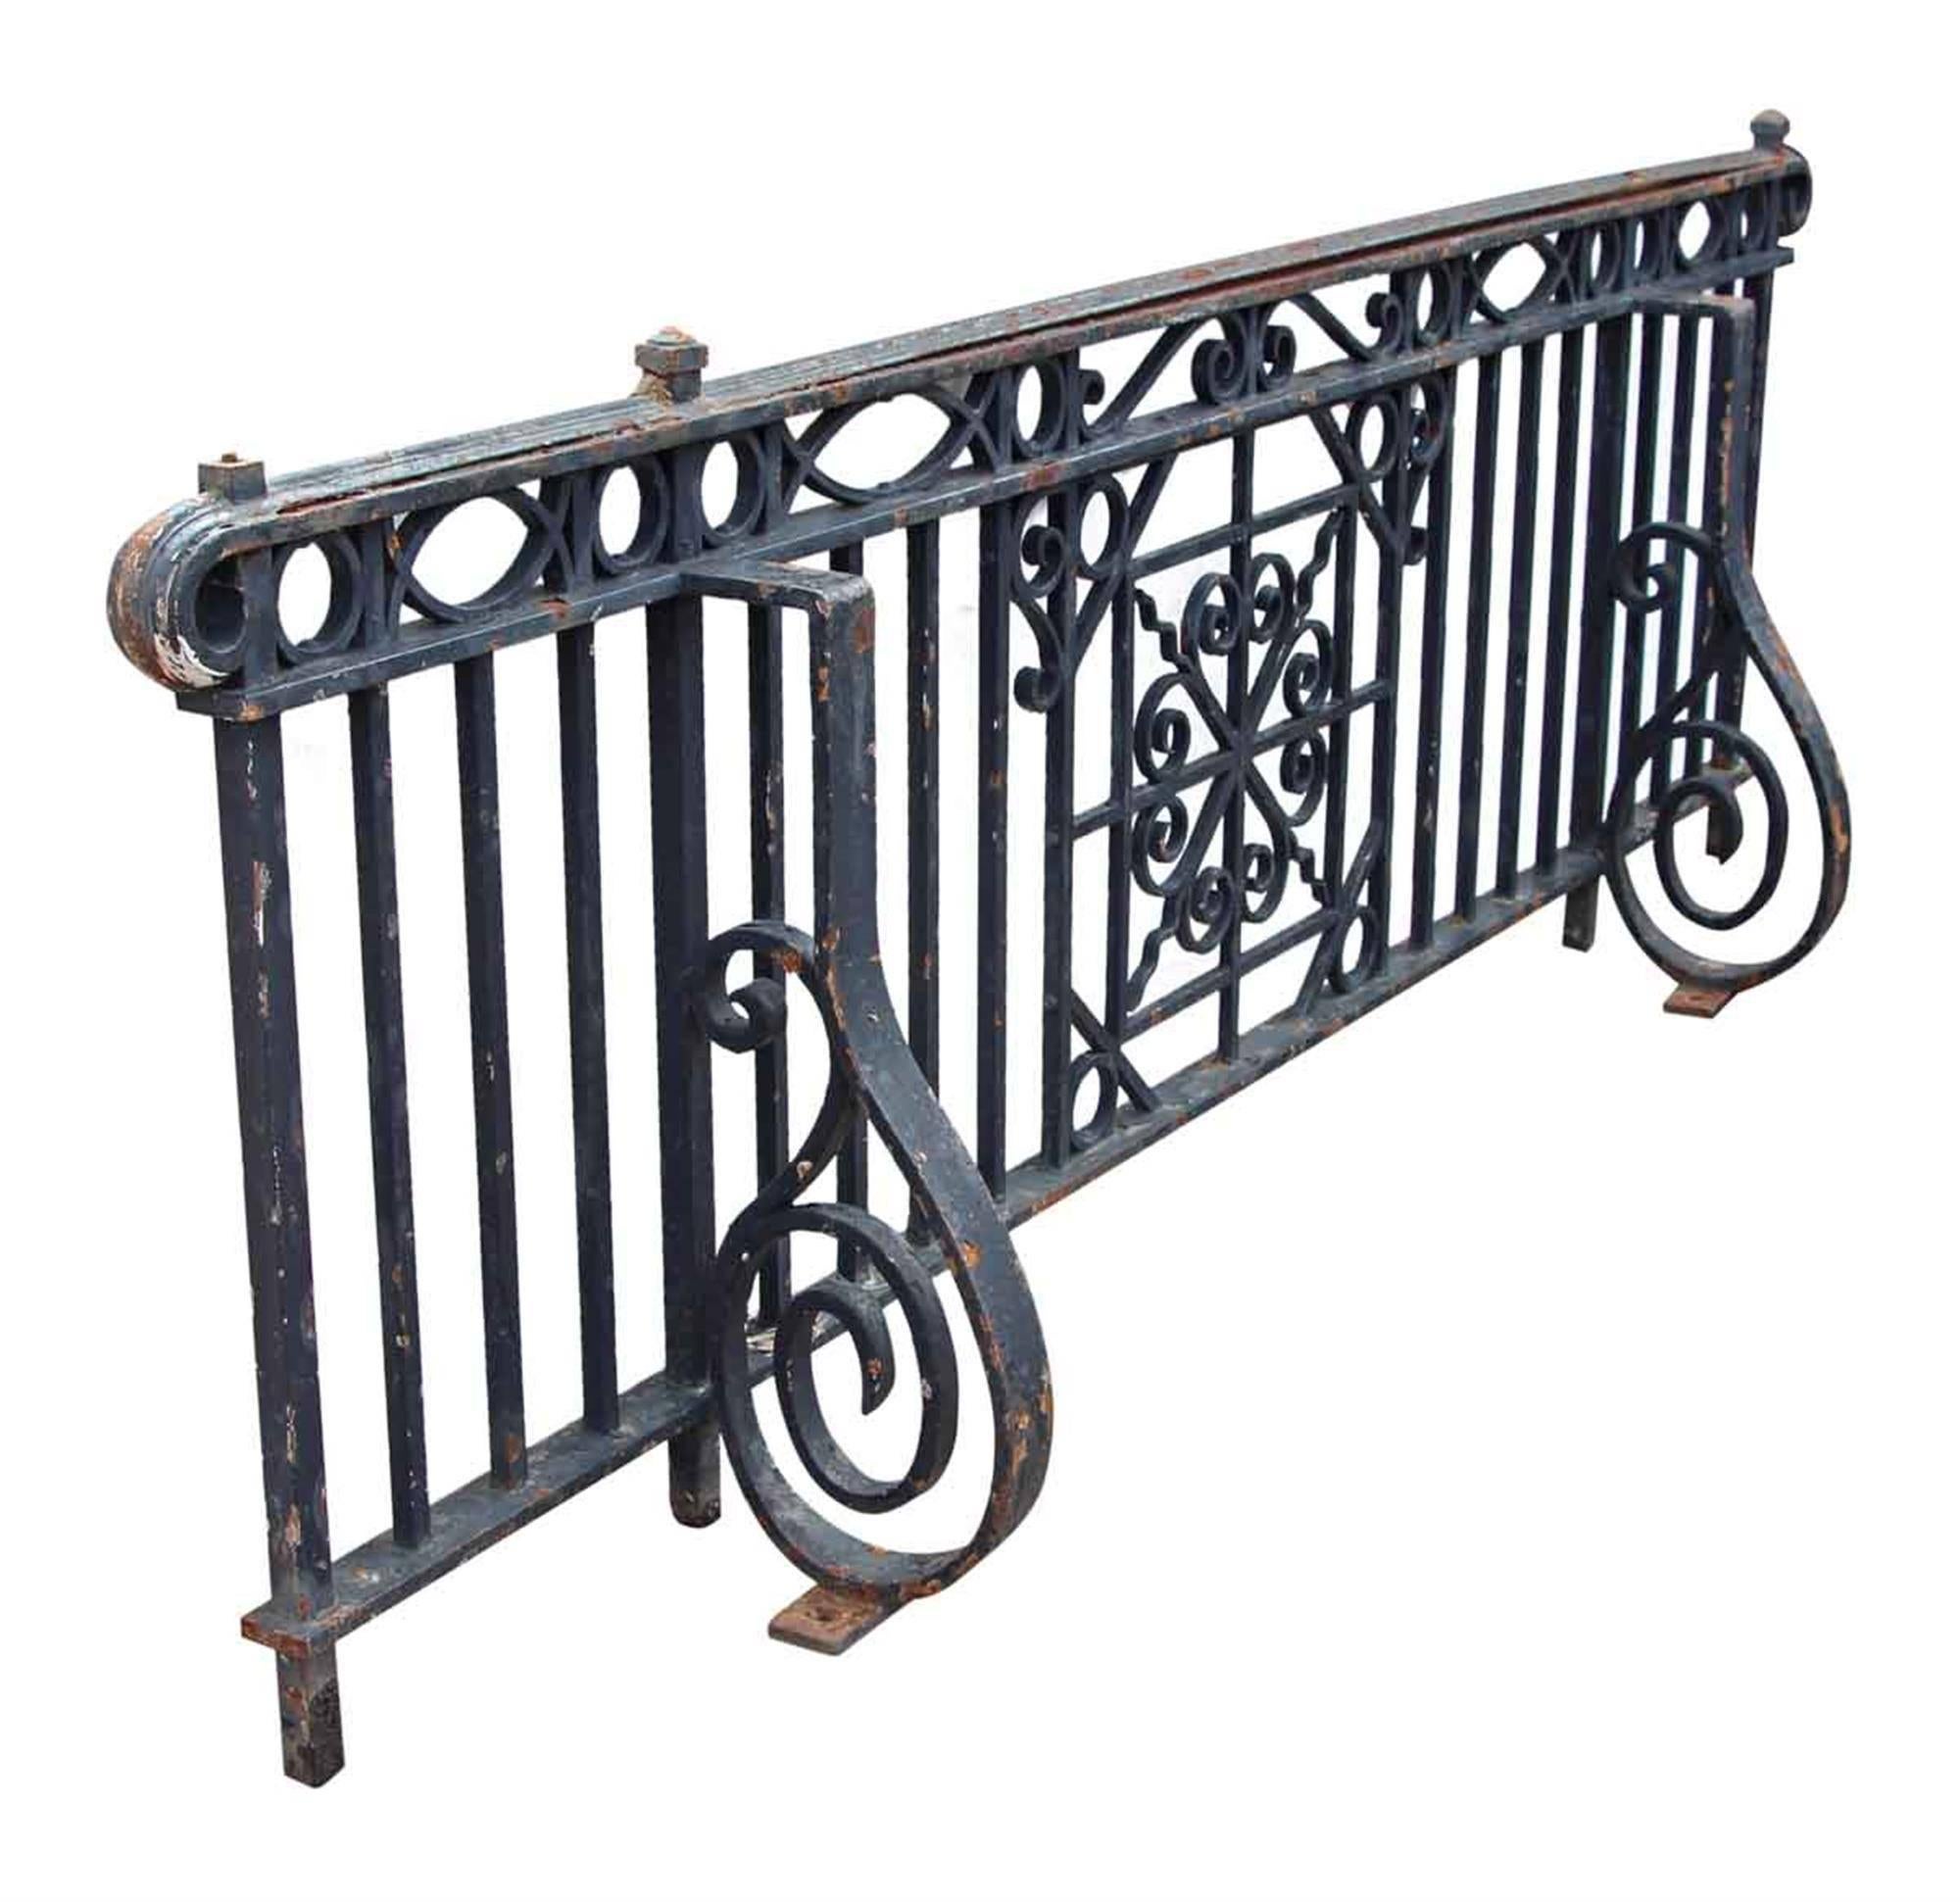 1905 wrought iron Juliet balcony with hand-wrought details and amazing mounting brackets. This can be seen at our 400 Gilligan St location in Scranton, PA.